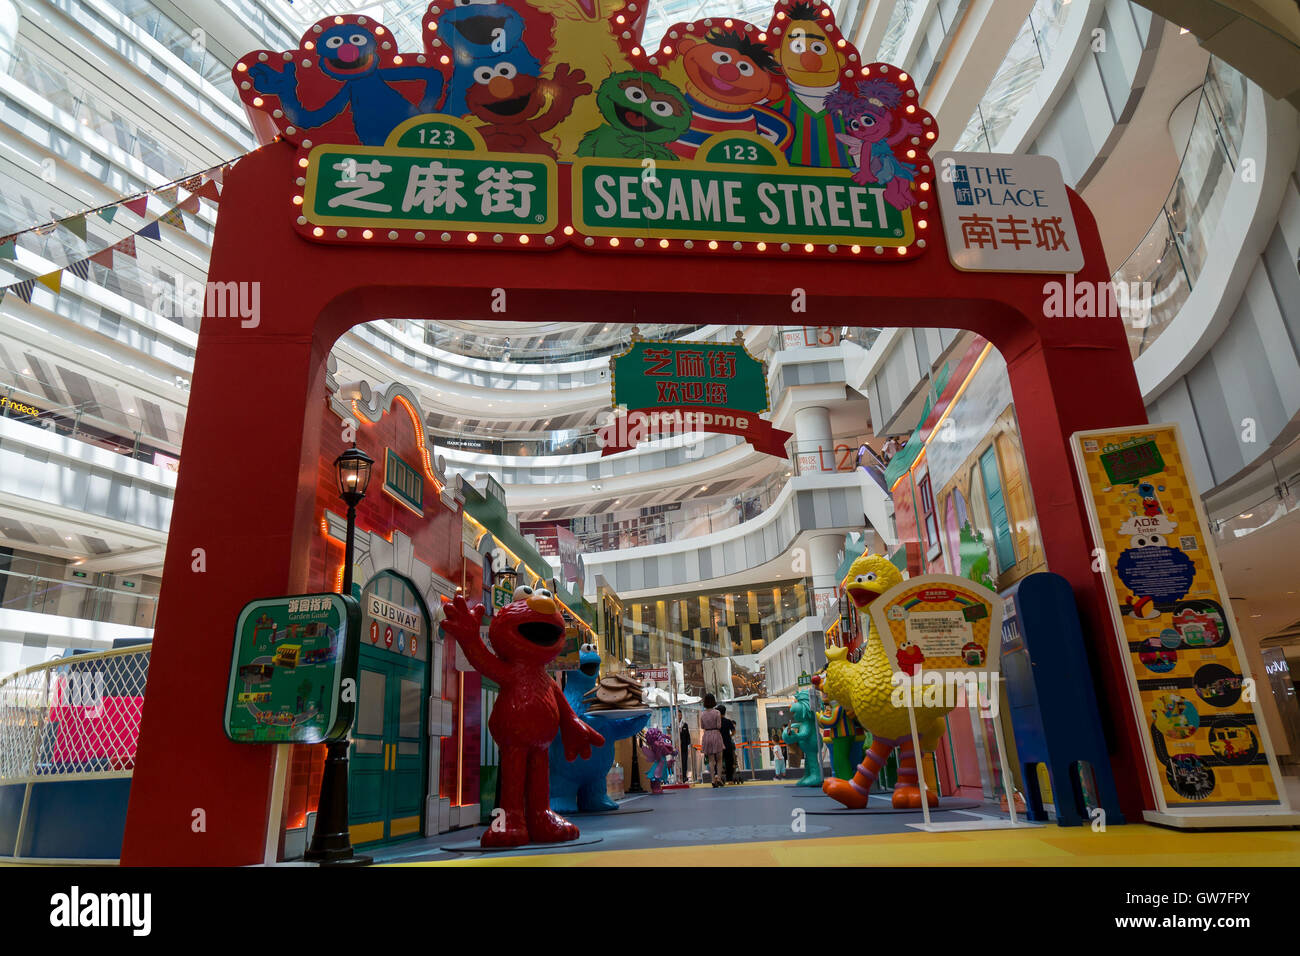 Shanghai, Shanghai, China. 13th Sep, 2016. Shanghai, CHINA- September 12 2016: (EDITORIAL USE ONLY. CHINA OUT) Cartoon statues at the Sesame Street in Shanghai. A cartoon-themed exhibition of Â¡Â®Sesame StreetÂ¡Â¯ is held at a shopping mall in Shanghai, attracting lots of children and their parents. Sesame Street is a long-running American children's television series. The program is known for its educational content, and images communicated through the use of Jim Henson's Muppets, animation, short films, humor, and cultural references. The series premiered on November 10, 1969, to positi Stock Photo